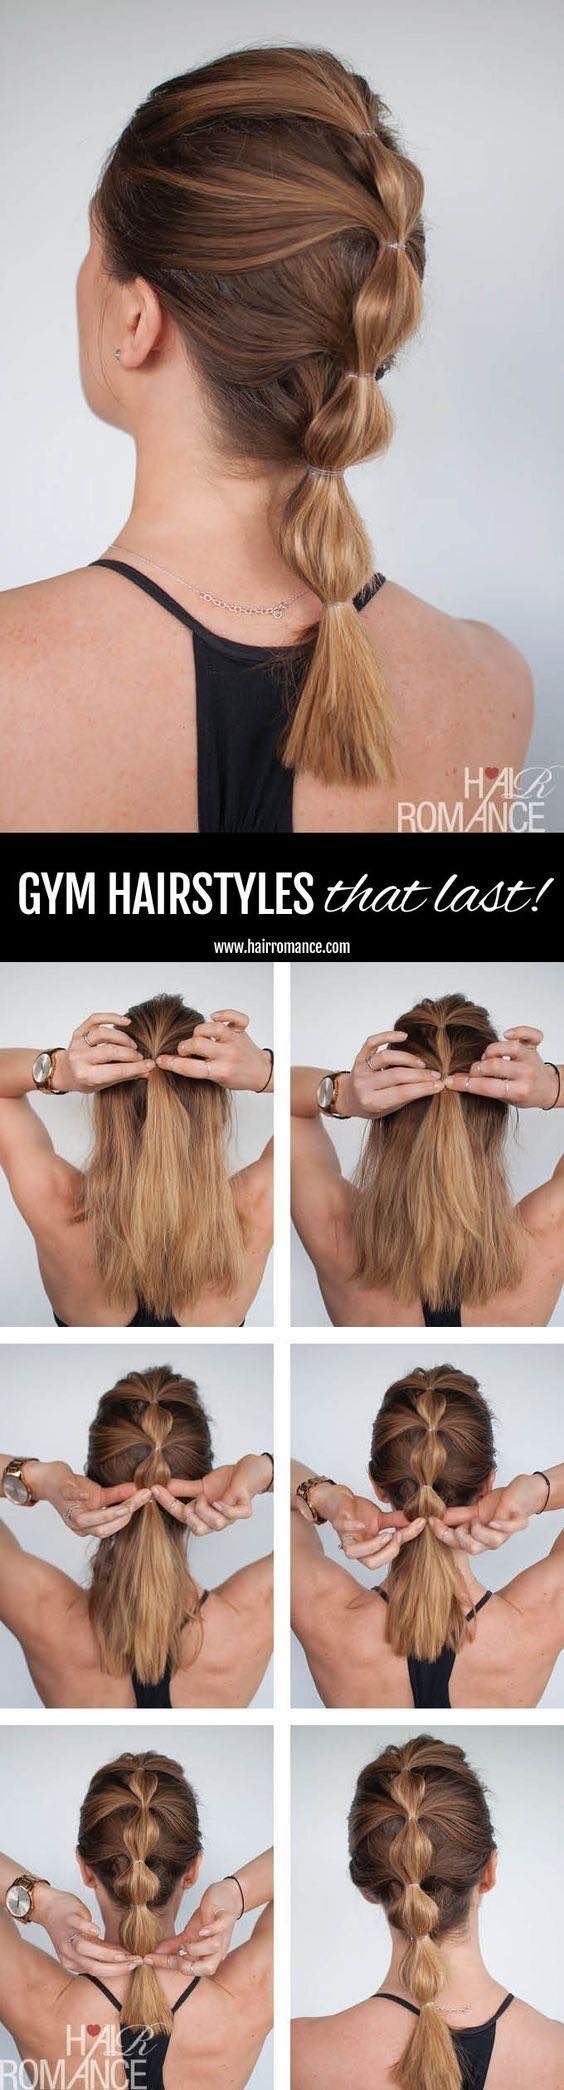 9 hair tricks every woman should know